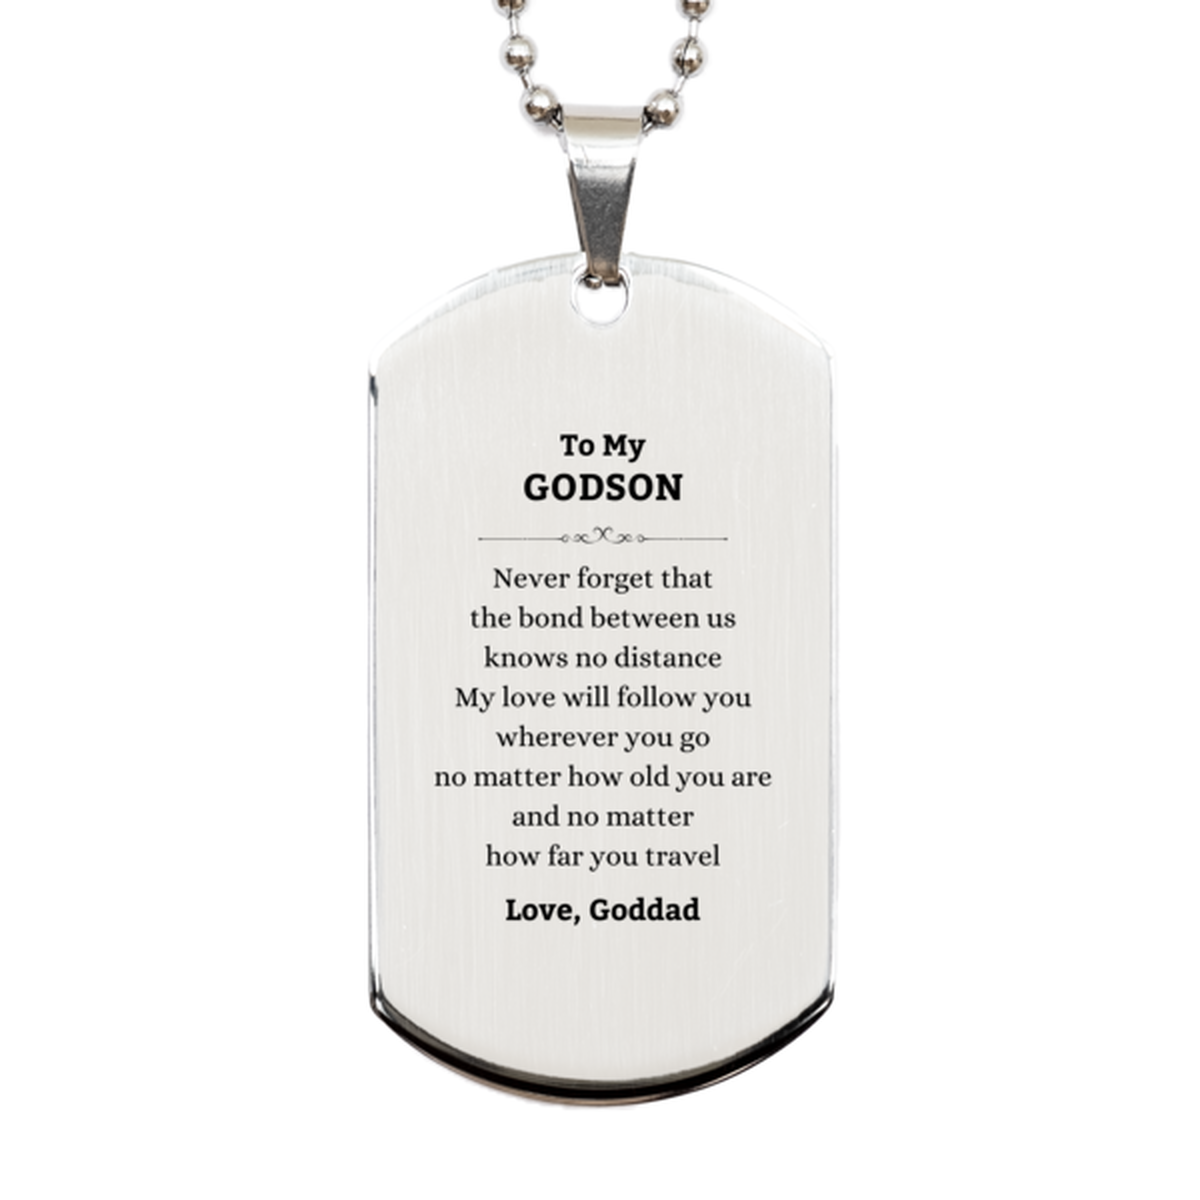 Godson Birthday Gifts from Goddad, Adjustable Silver Dog Tag for Godson Christmas Graduation Unique Gifts Godson Never forget that the bond between us knows no distance. Love, Goddad